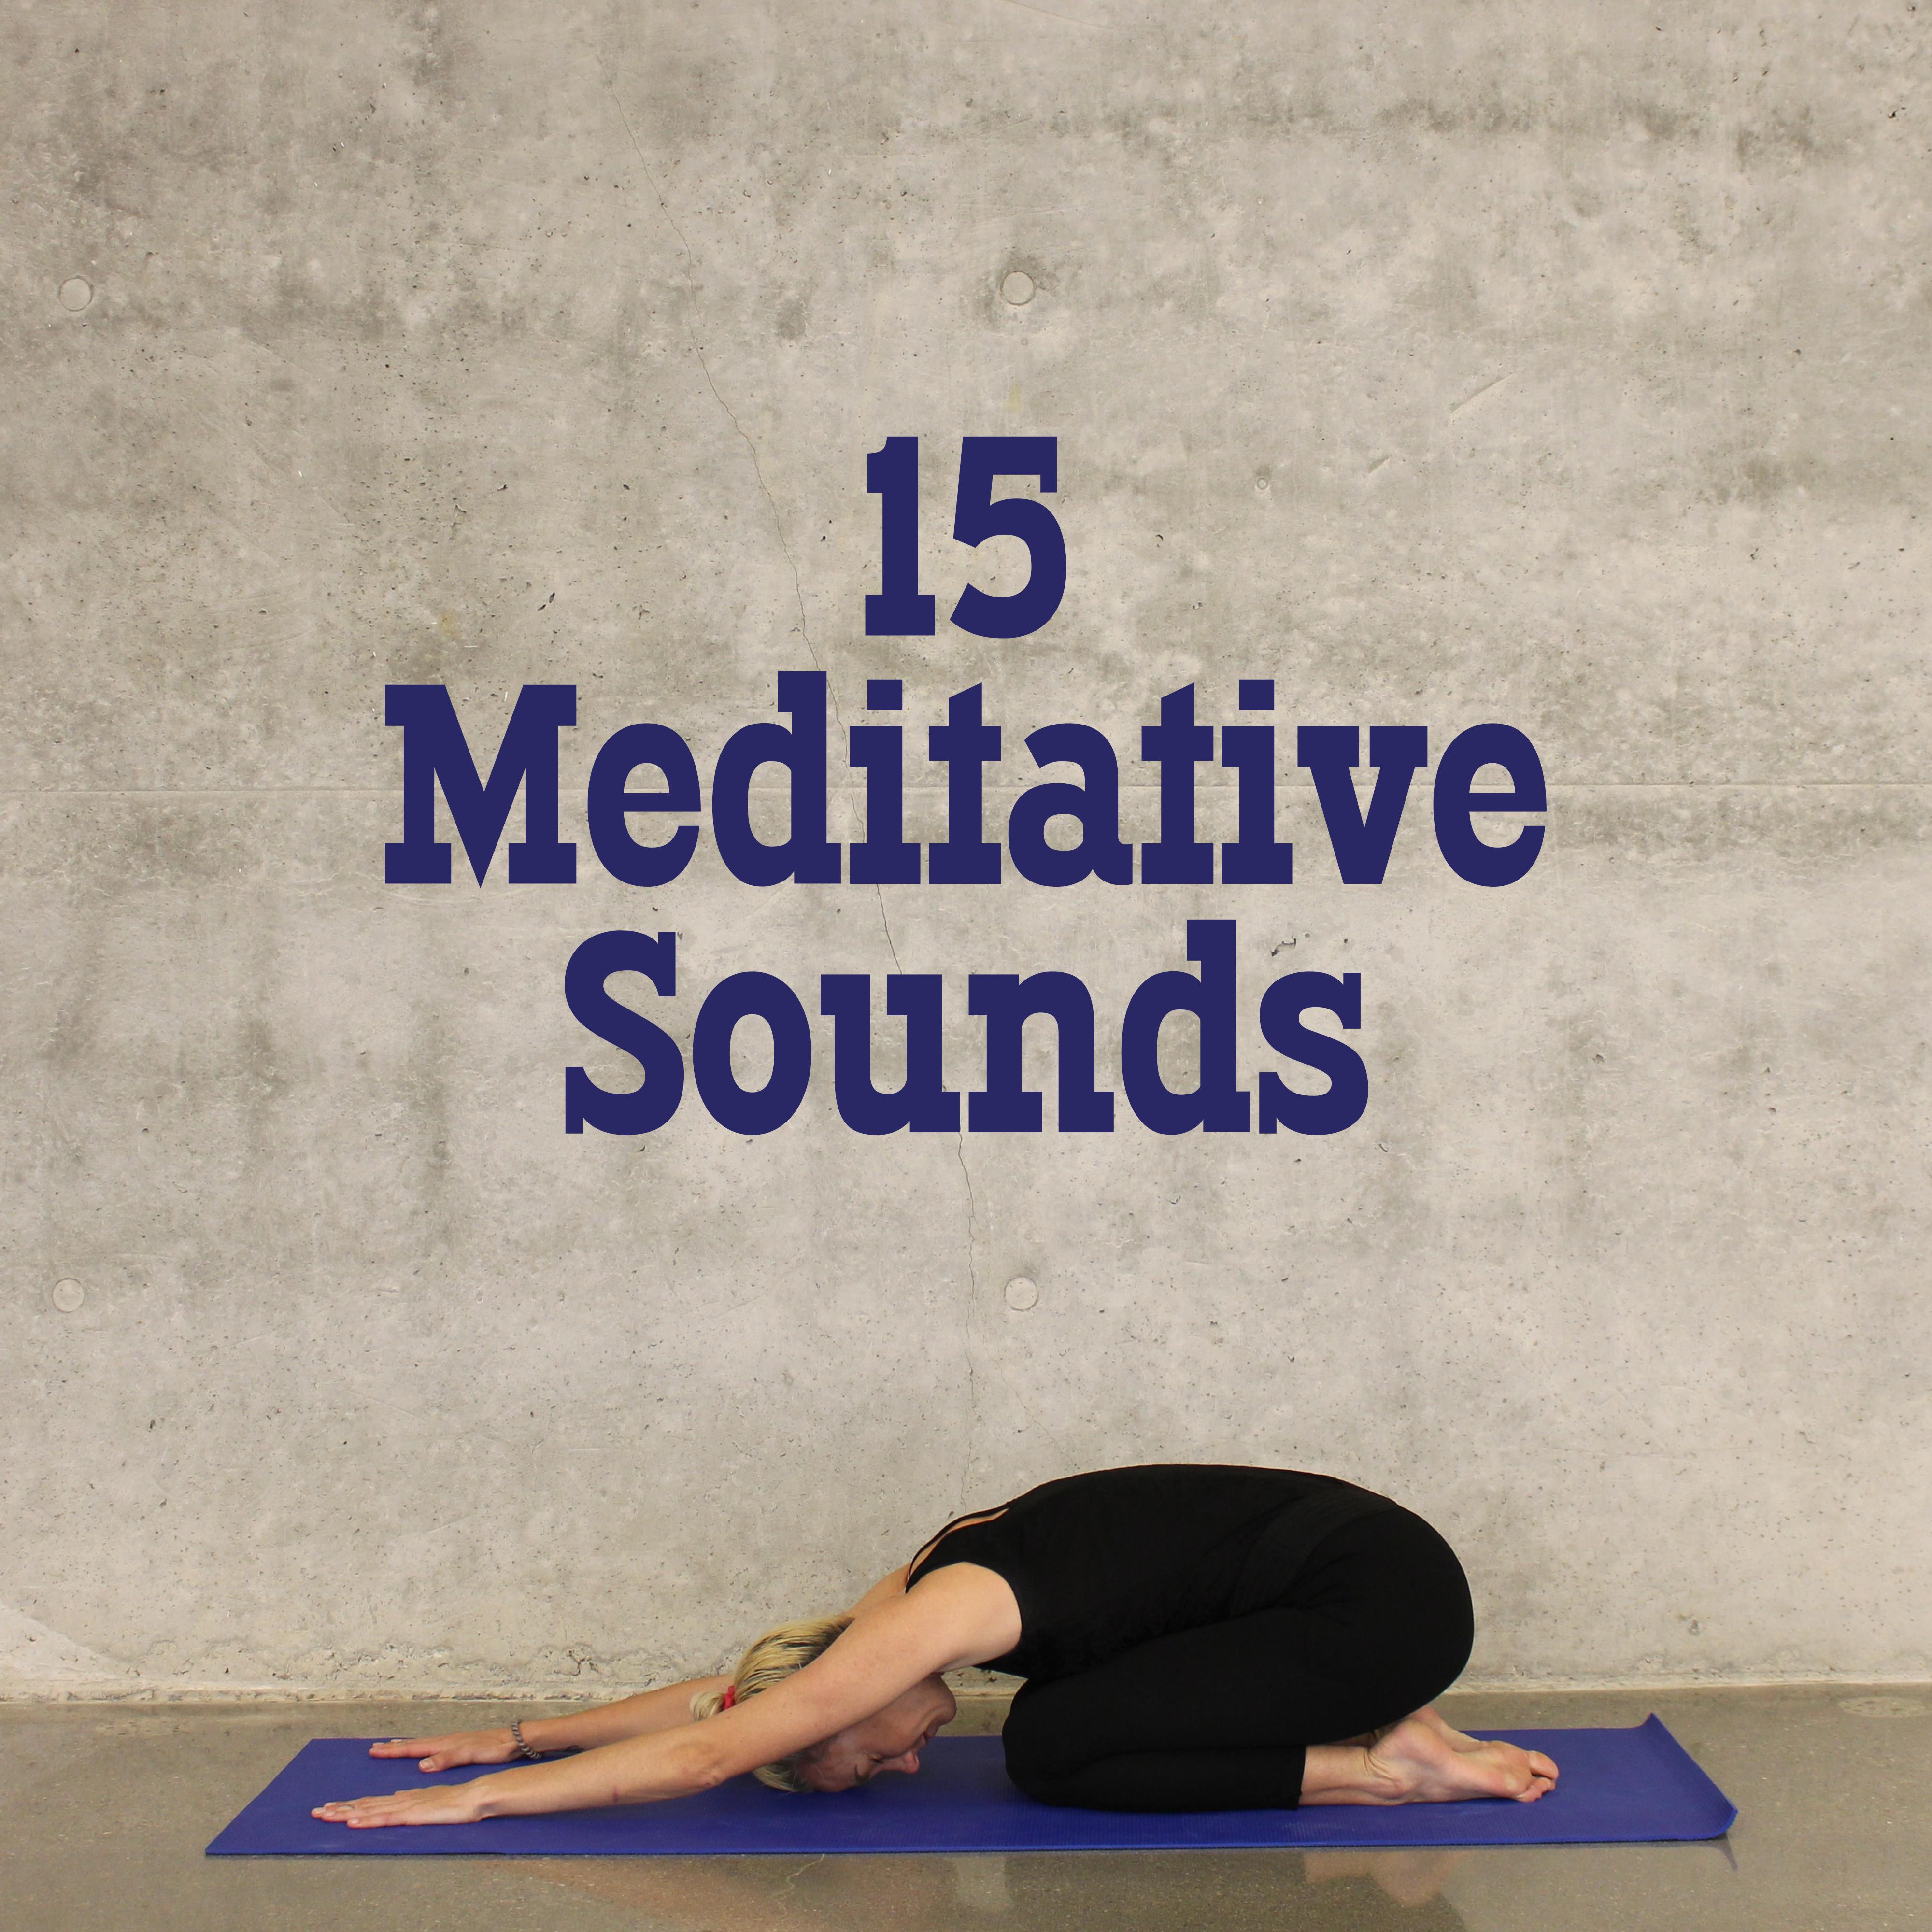 15 Meditative Sounds: Chillout Zone, Deep Harmony with Meditation, Healing Yoga, Inner Focus, Mindfulness Relaxation, Pure Zen, Lounge